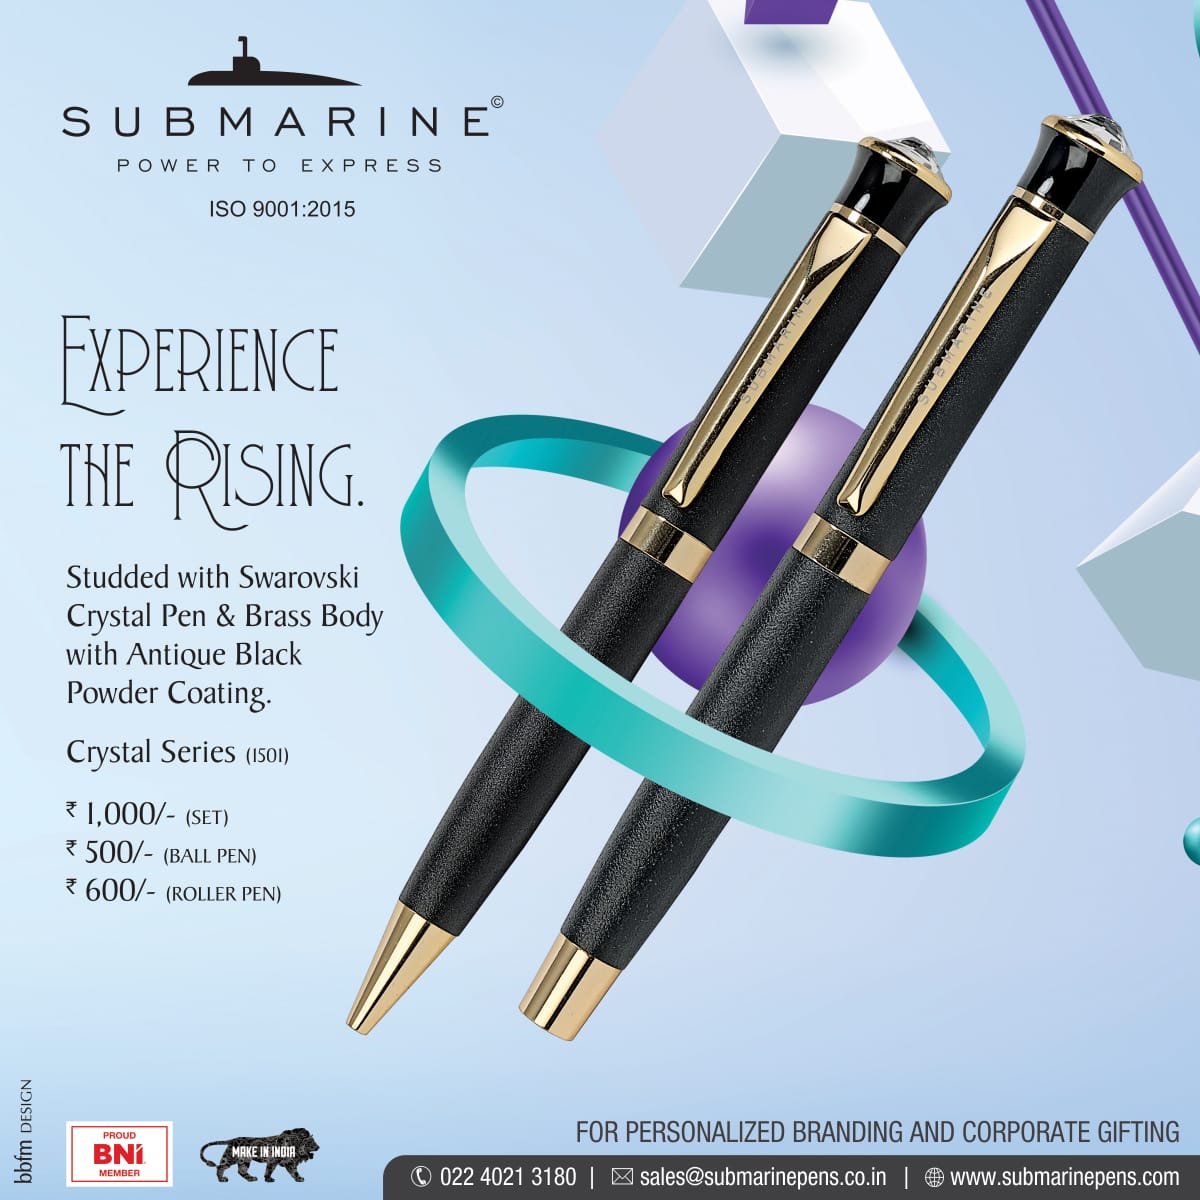 Submarine Pens - Perfect gifting solution for any occasion